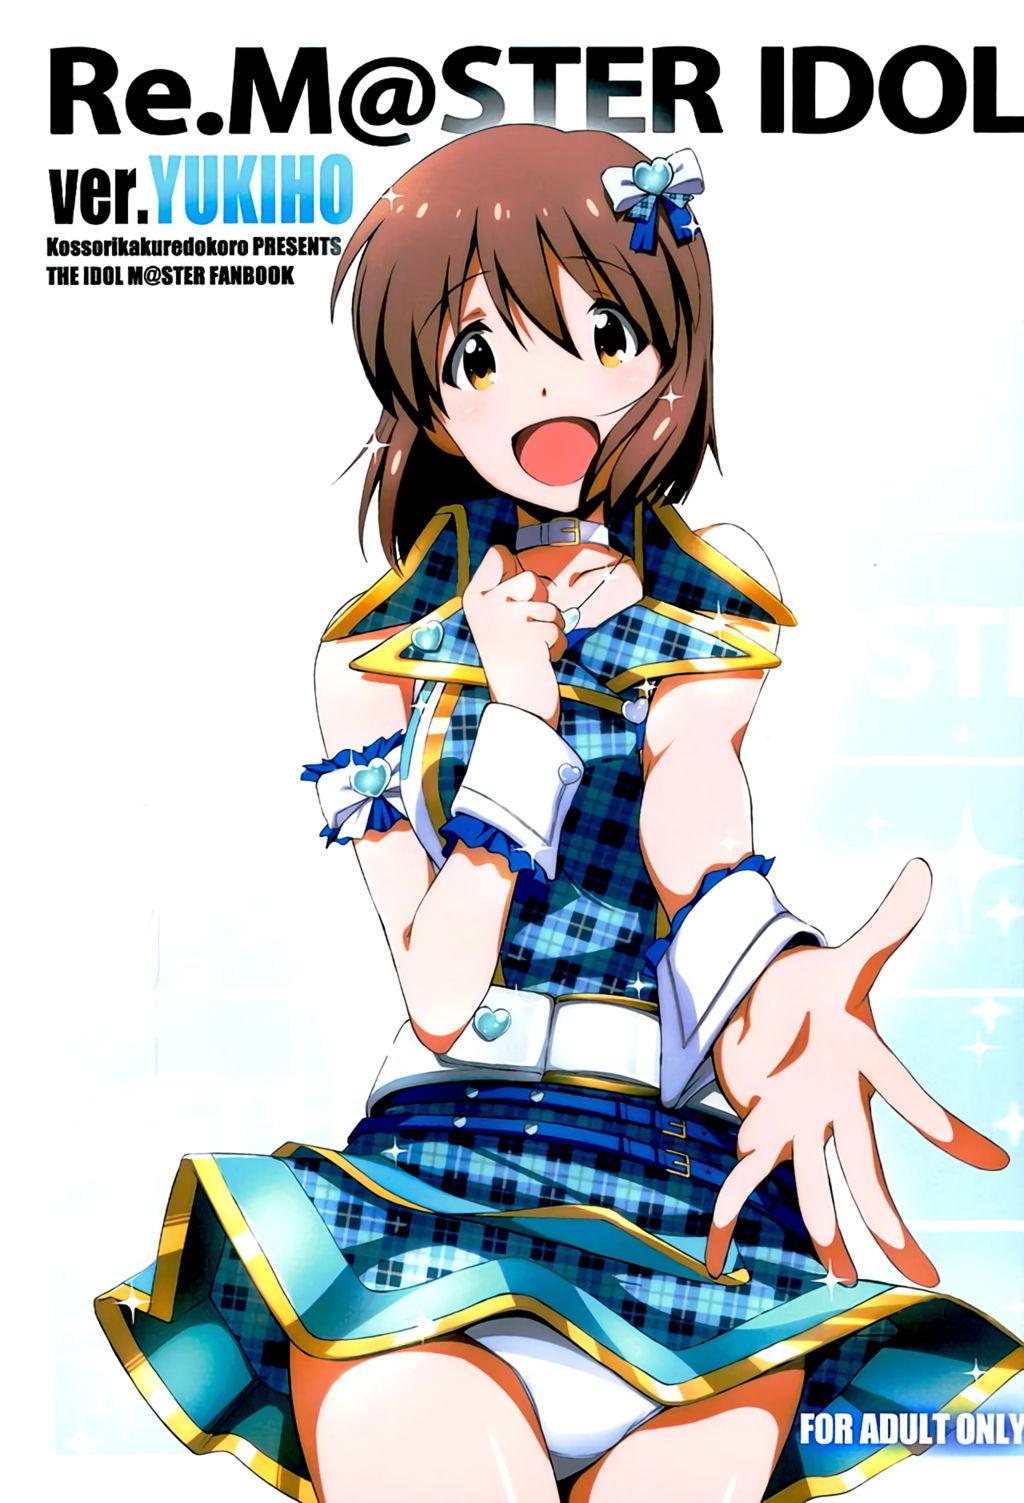 Jerkoff Re:M@STER IDOL ver.YUKIHO - The idolmaster Slutty - Page 2